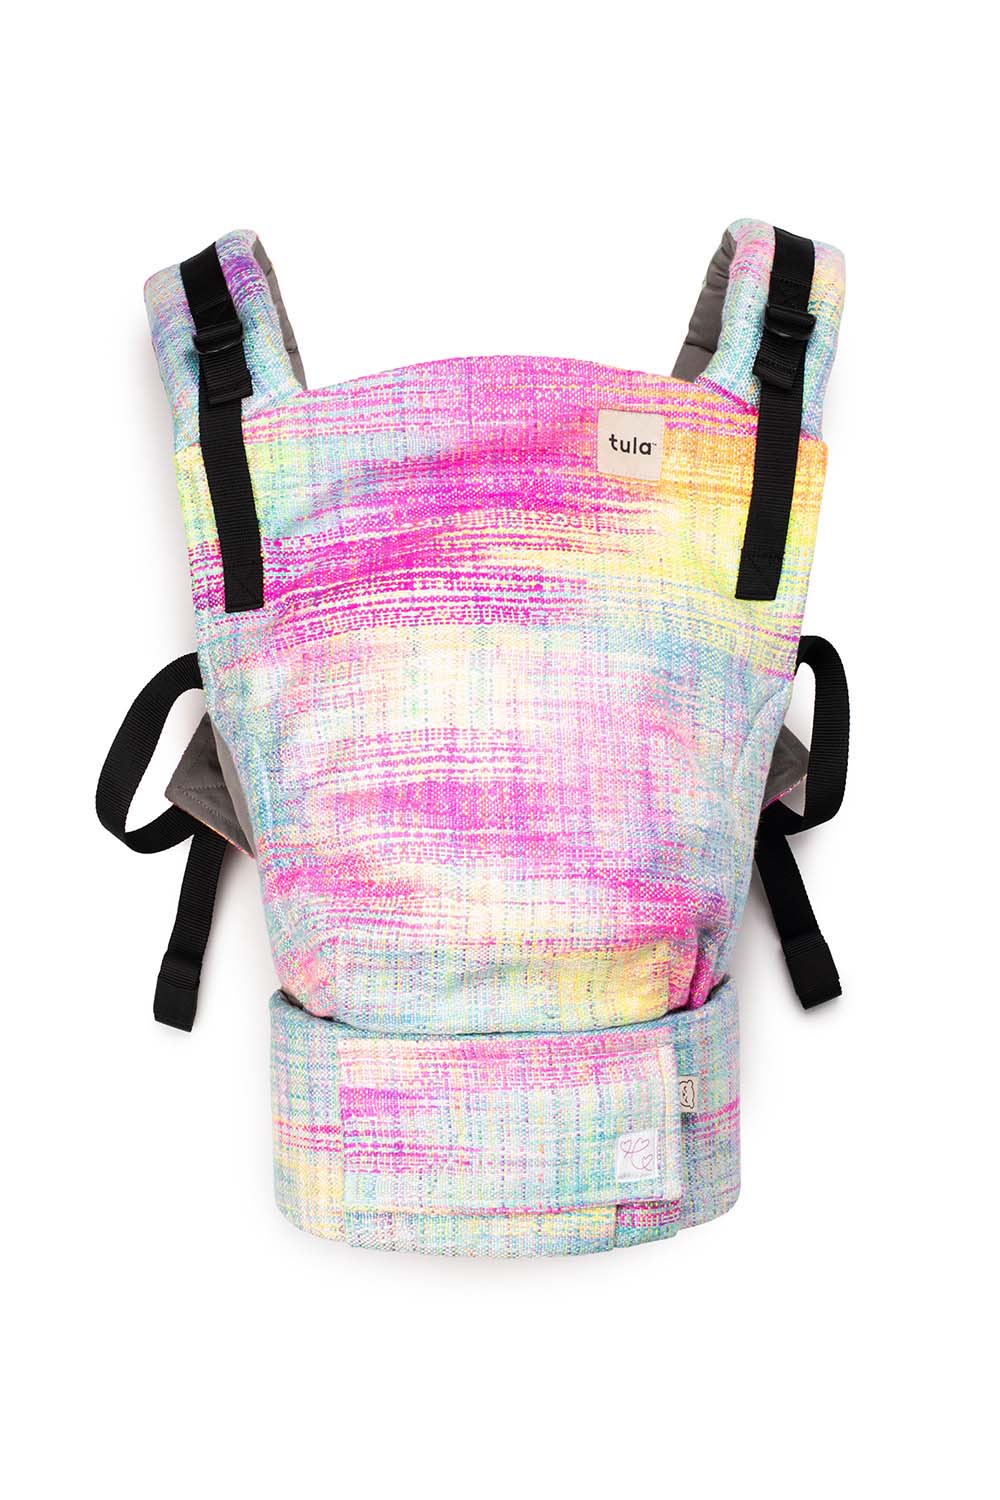 Ken's World - Signature Handwoven Free-to-Grow Baby Carrier